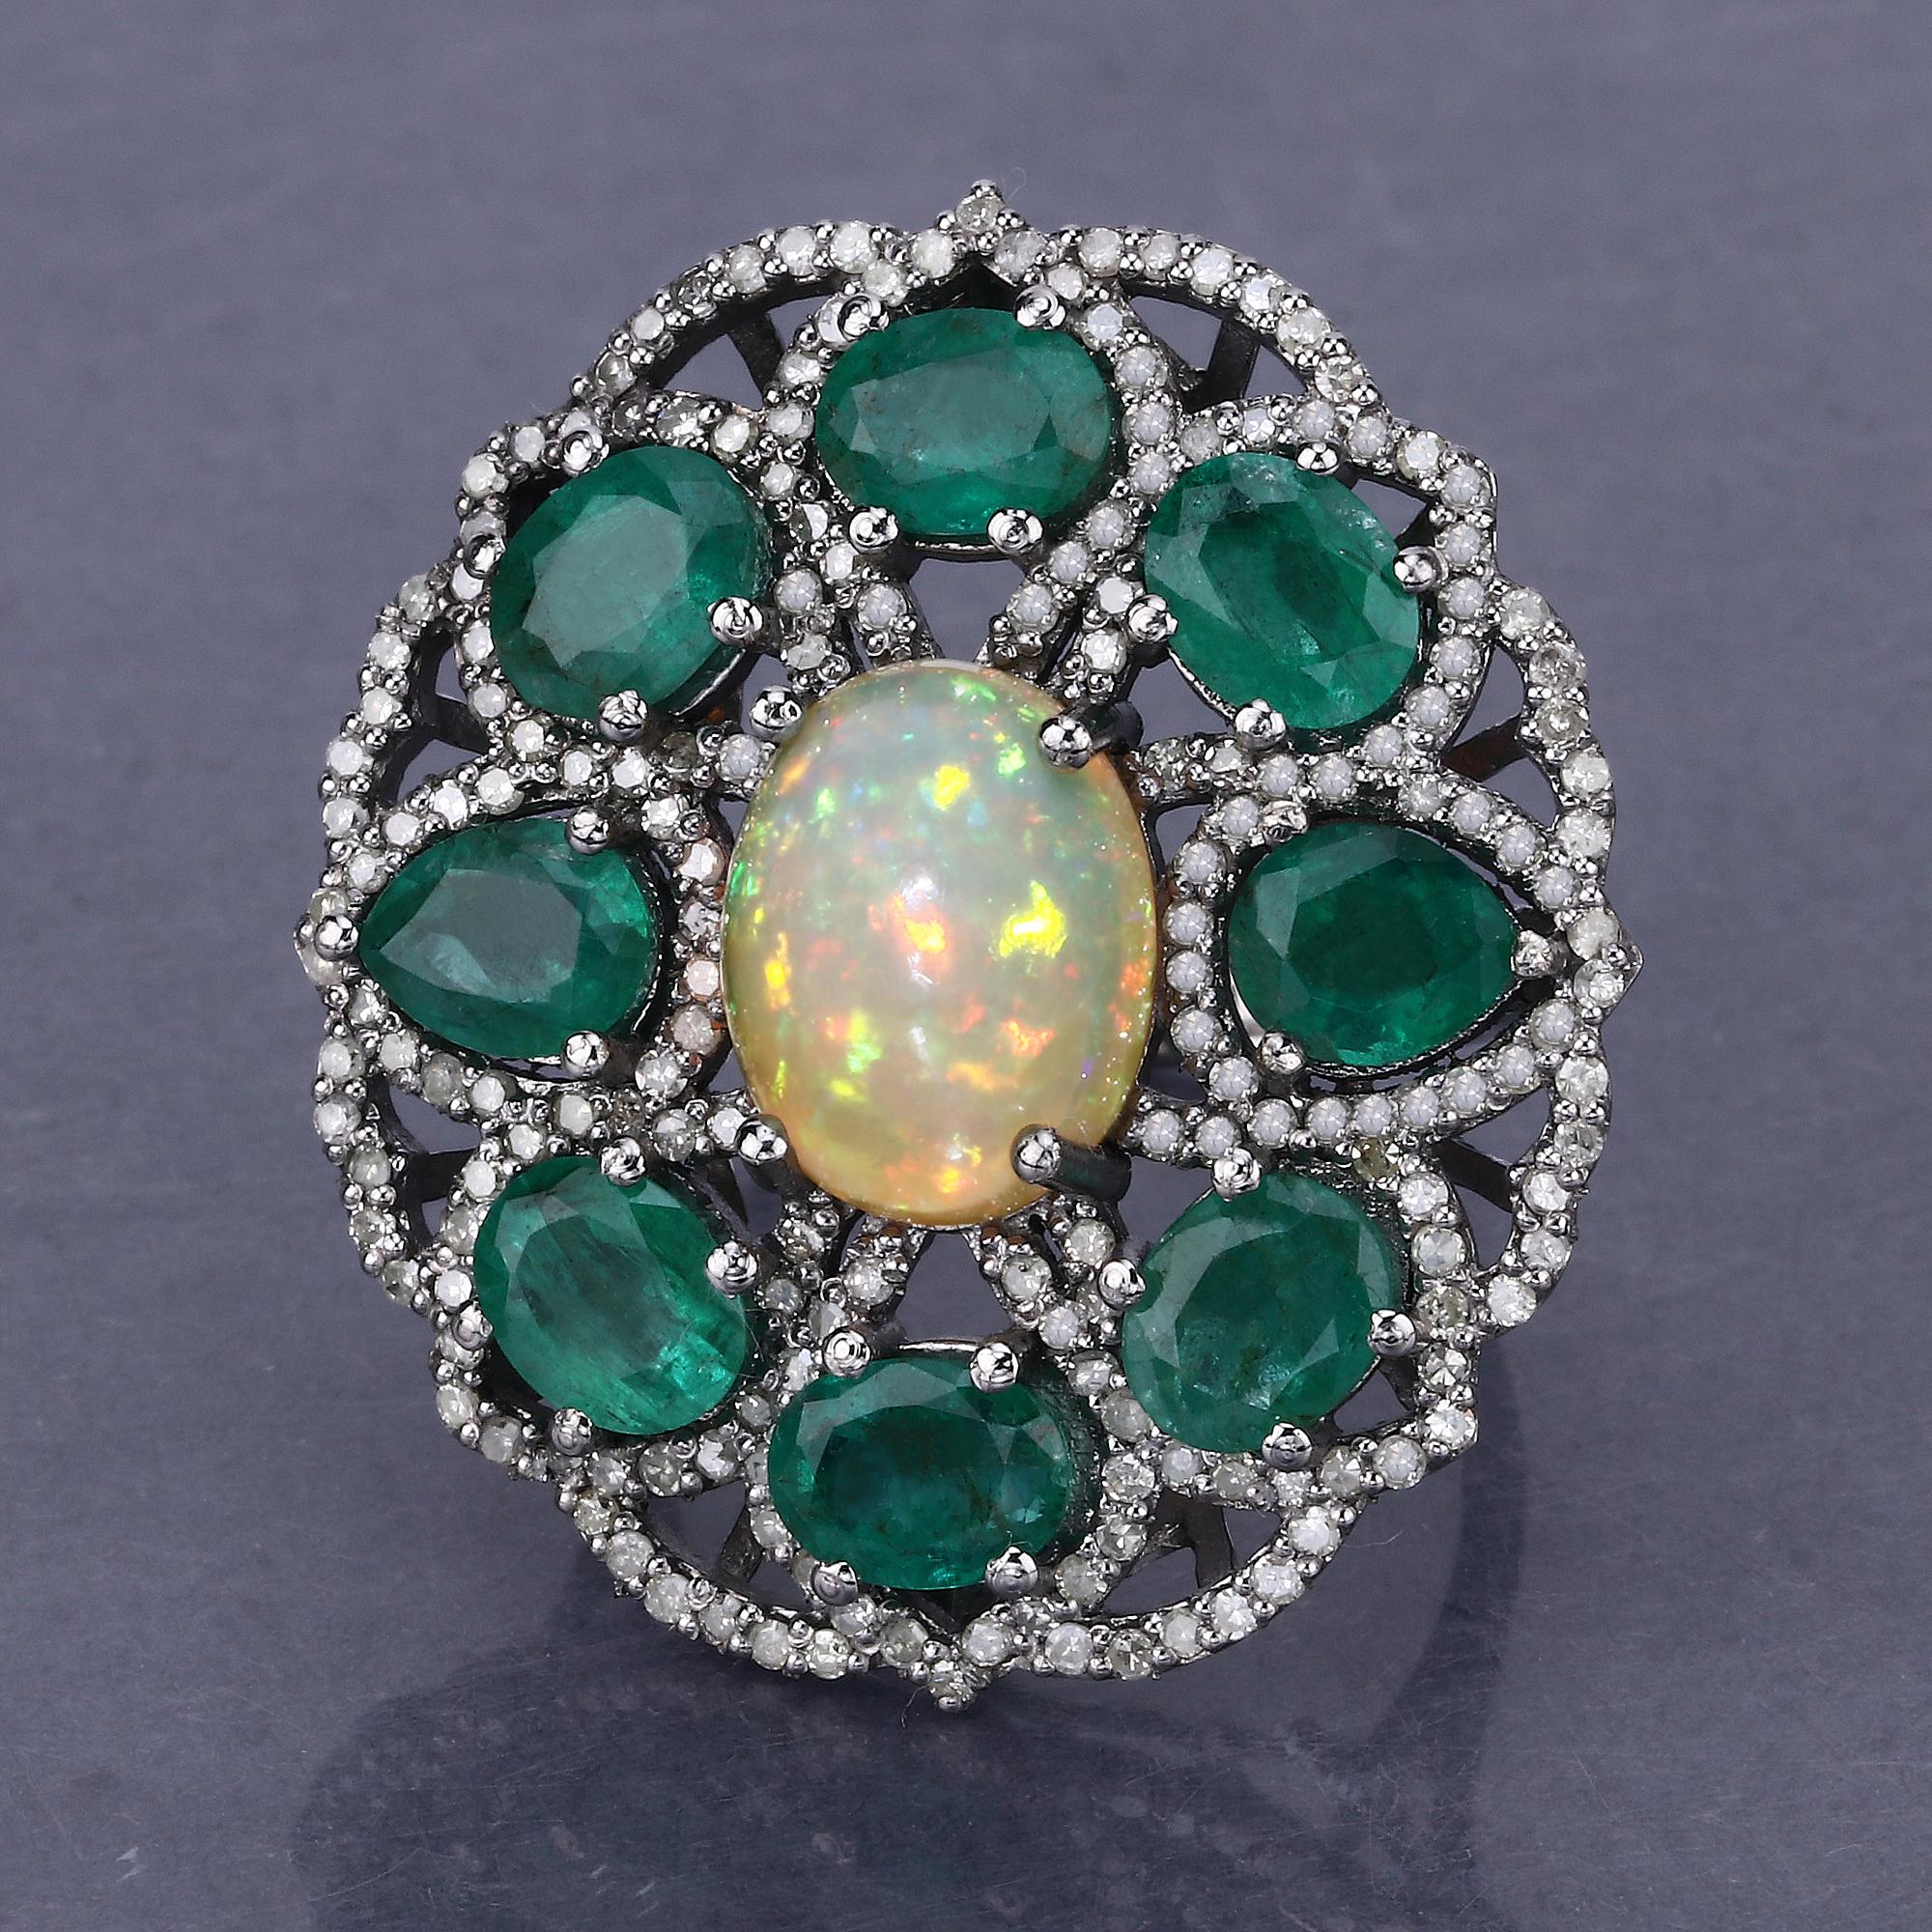 9.80cttw Ethiopian Opal, Emerald with Diamonds 1.31cttw Sterling Silver Ring For Sale 1